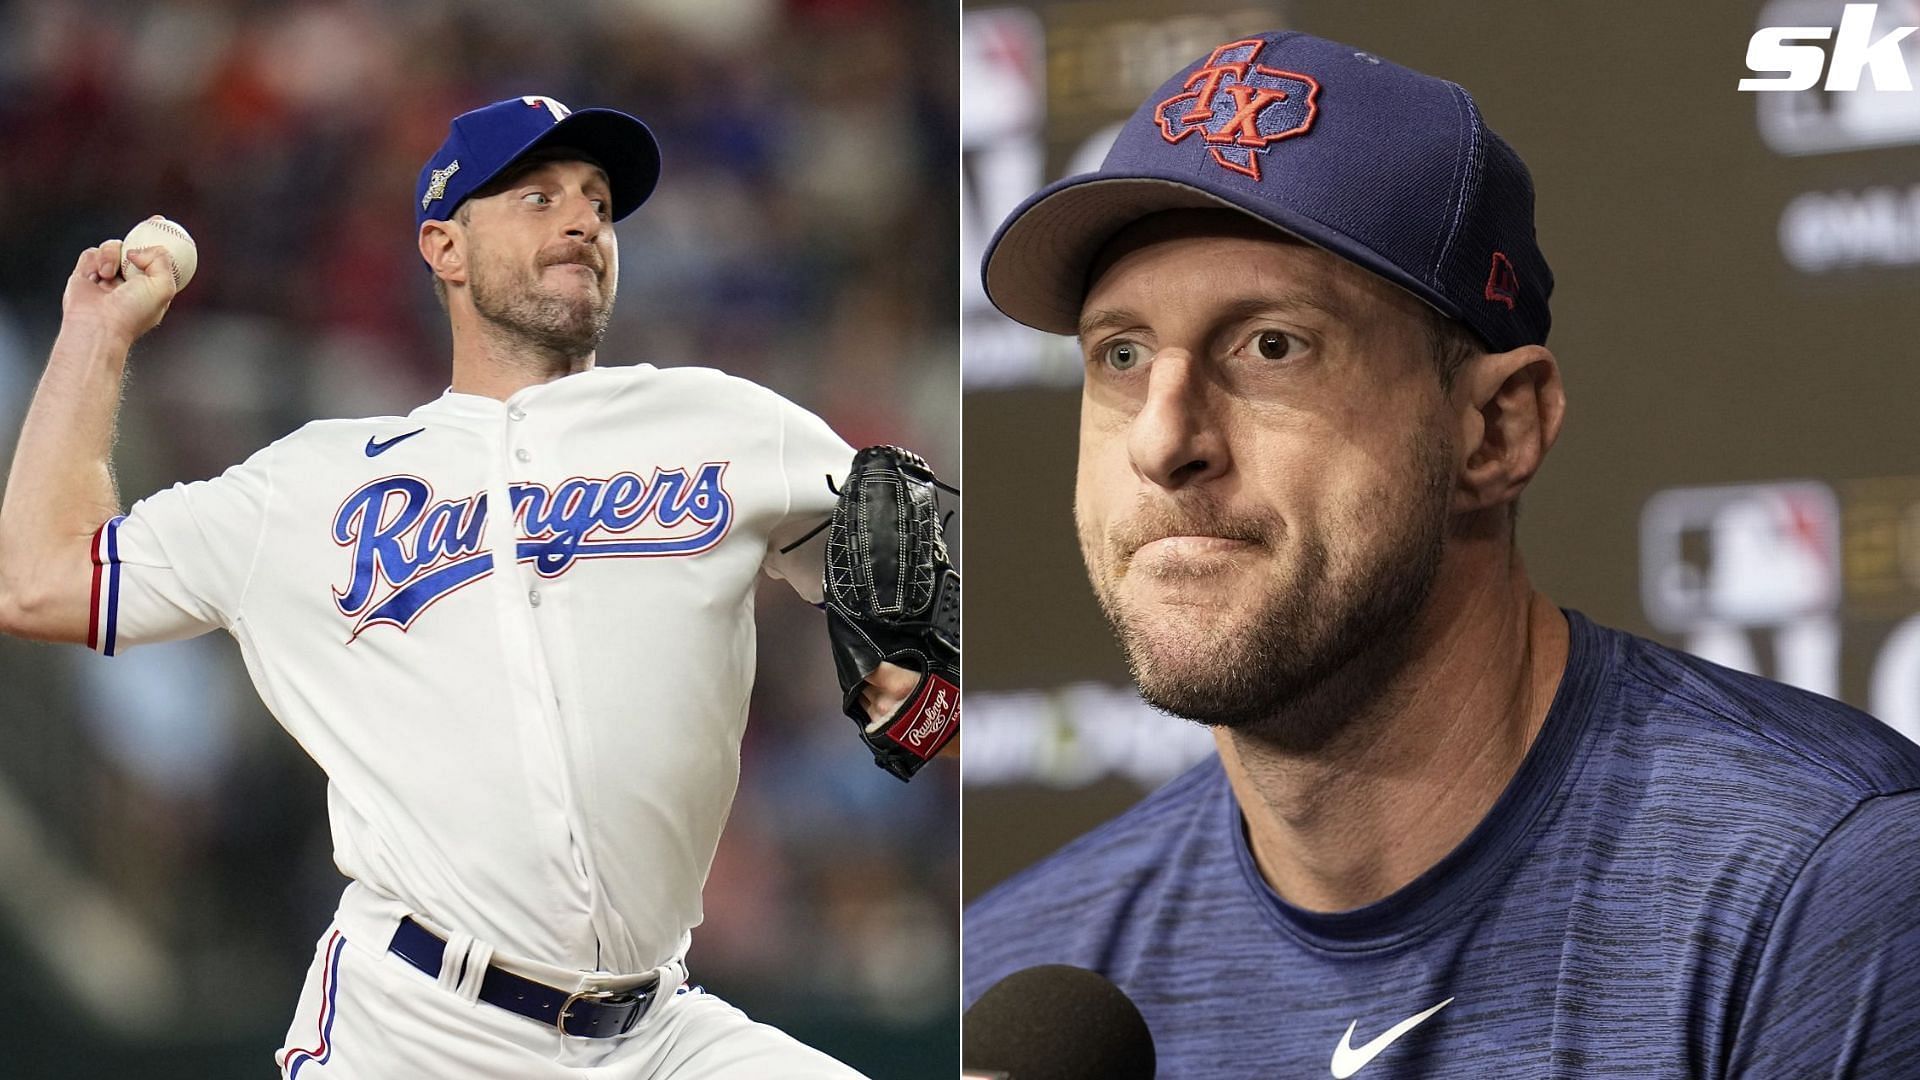 Max Scherzer, who will start the All-Star Game, has become a $210